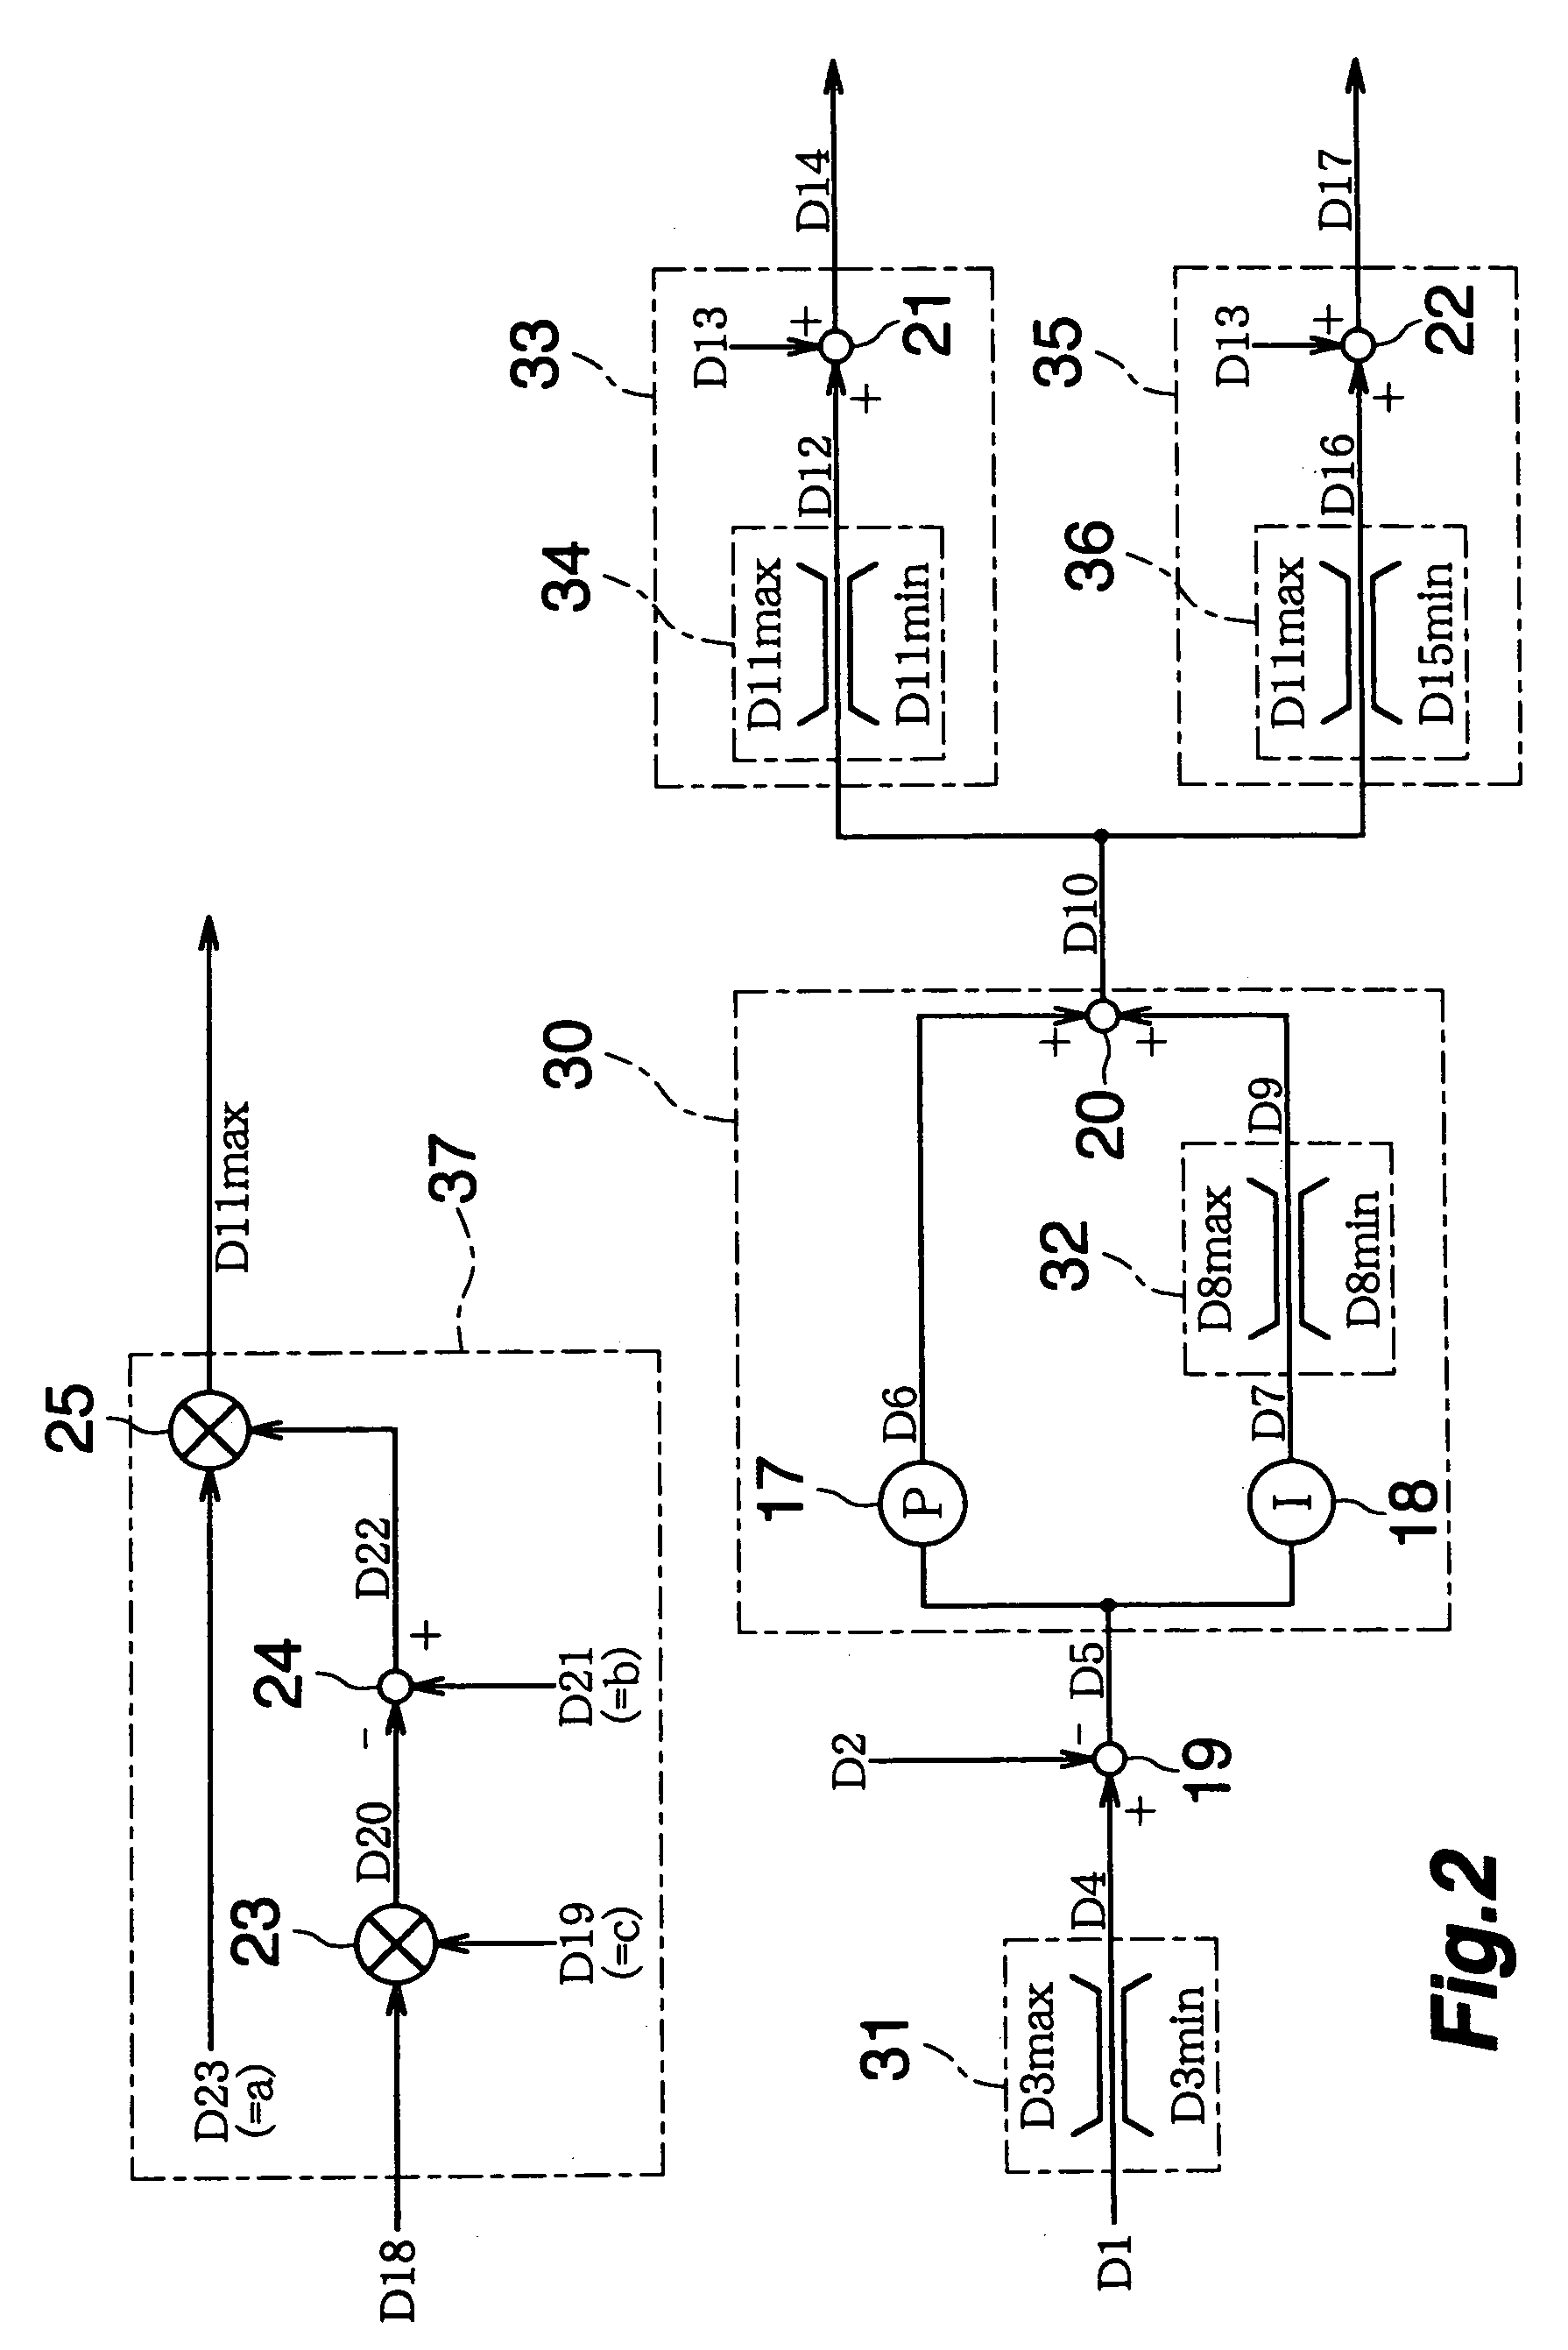 Control magnetic bearing device